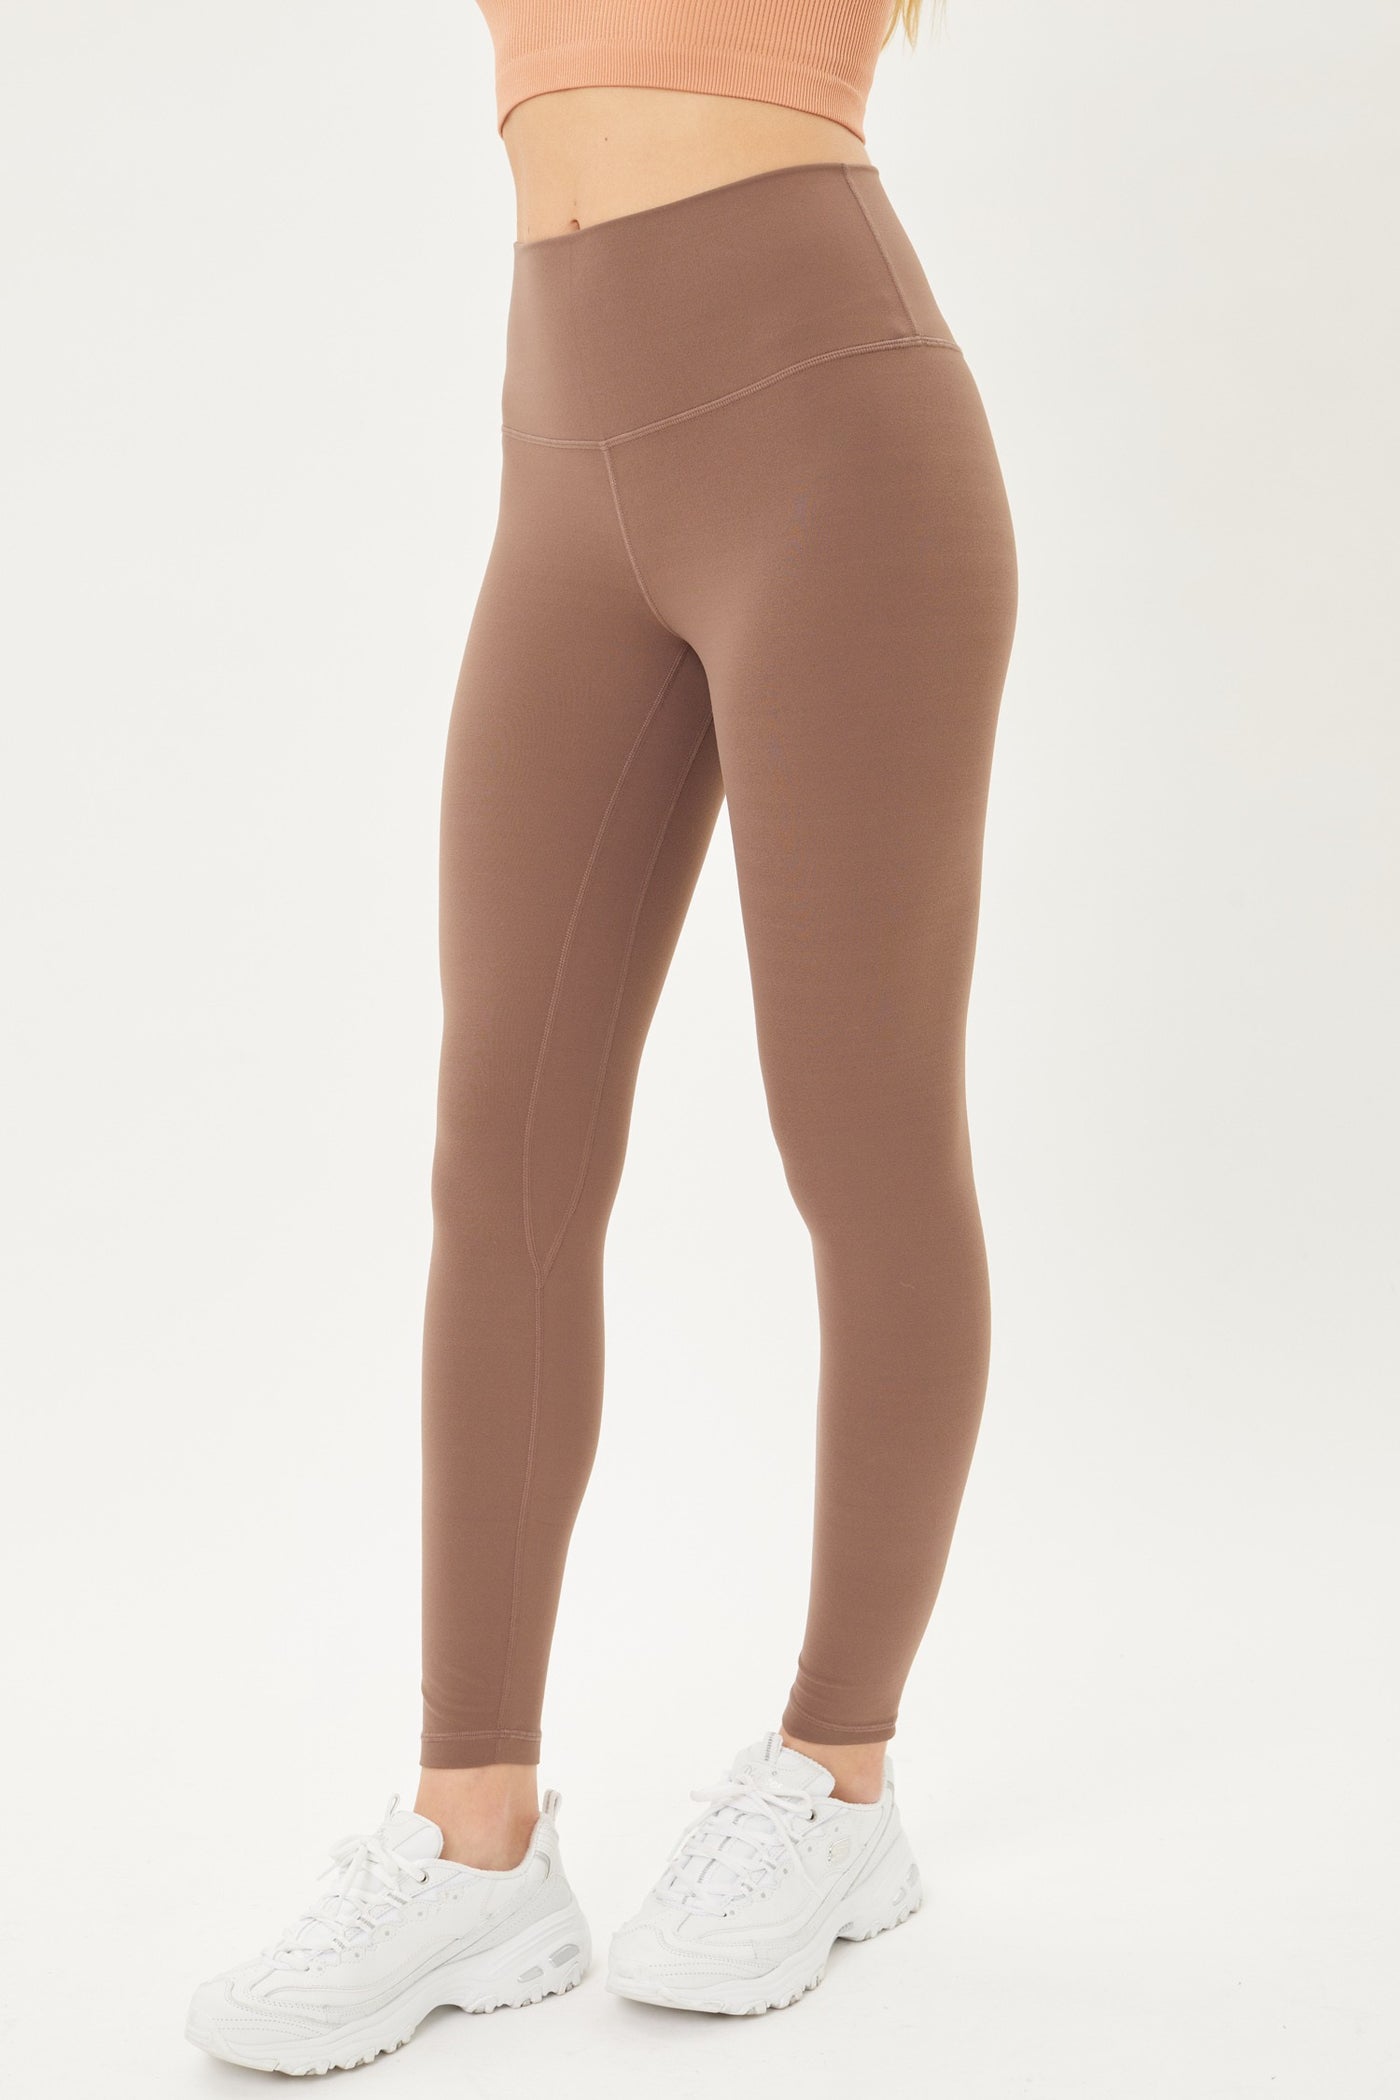 brown buttersoft solid legging